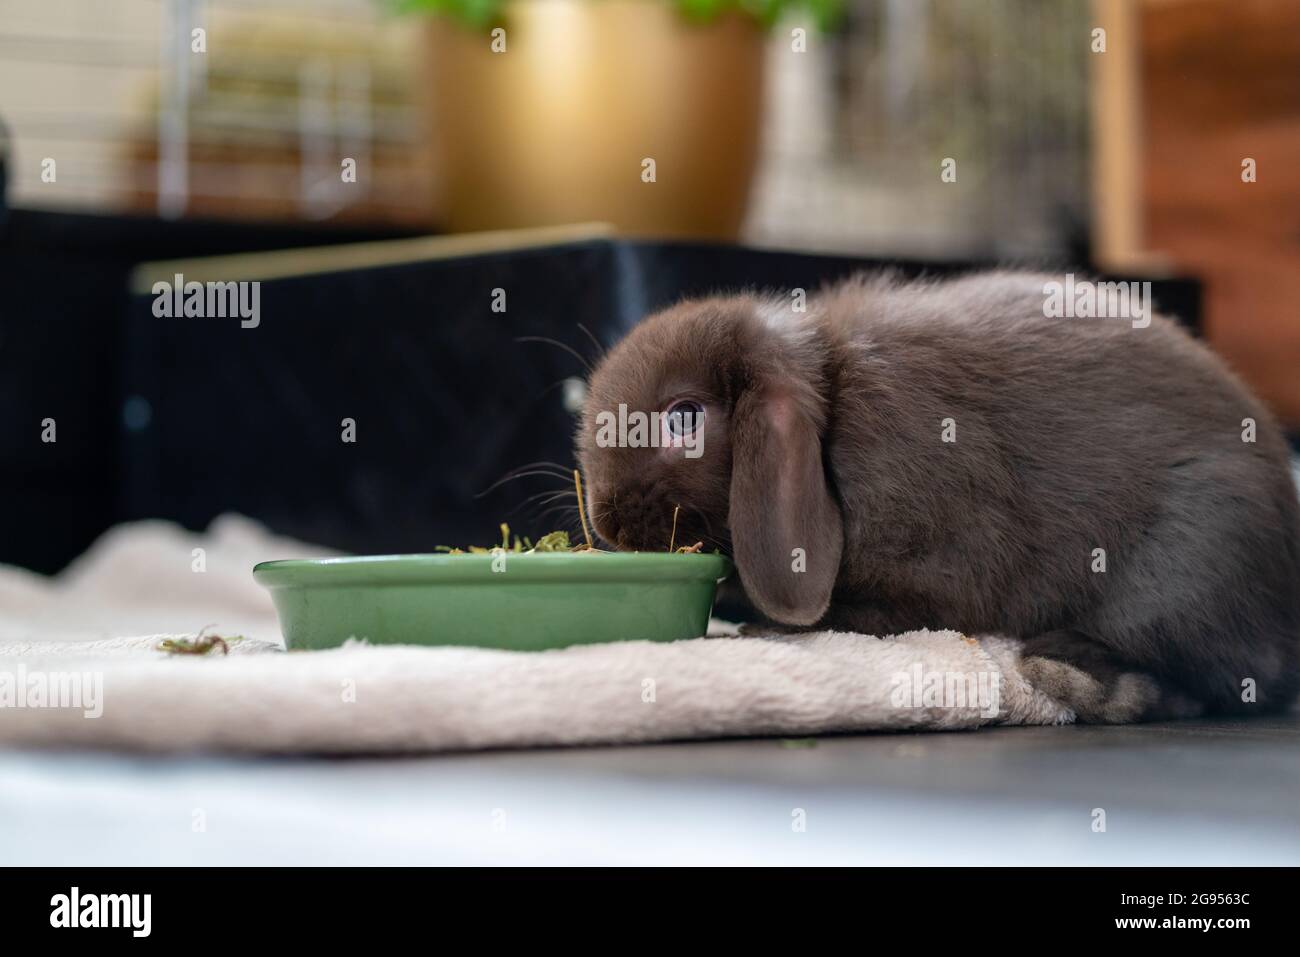 Brown, small dwarf rabbit (dwarf ram, ram) with floppy ears eats from a green bowl in the living room. Stock Photo